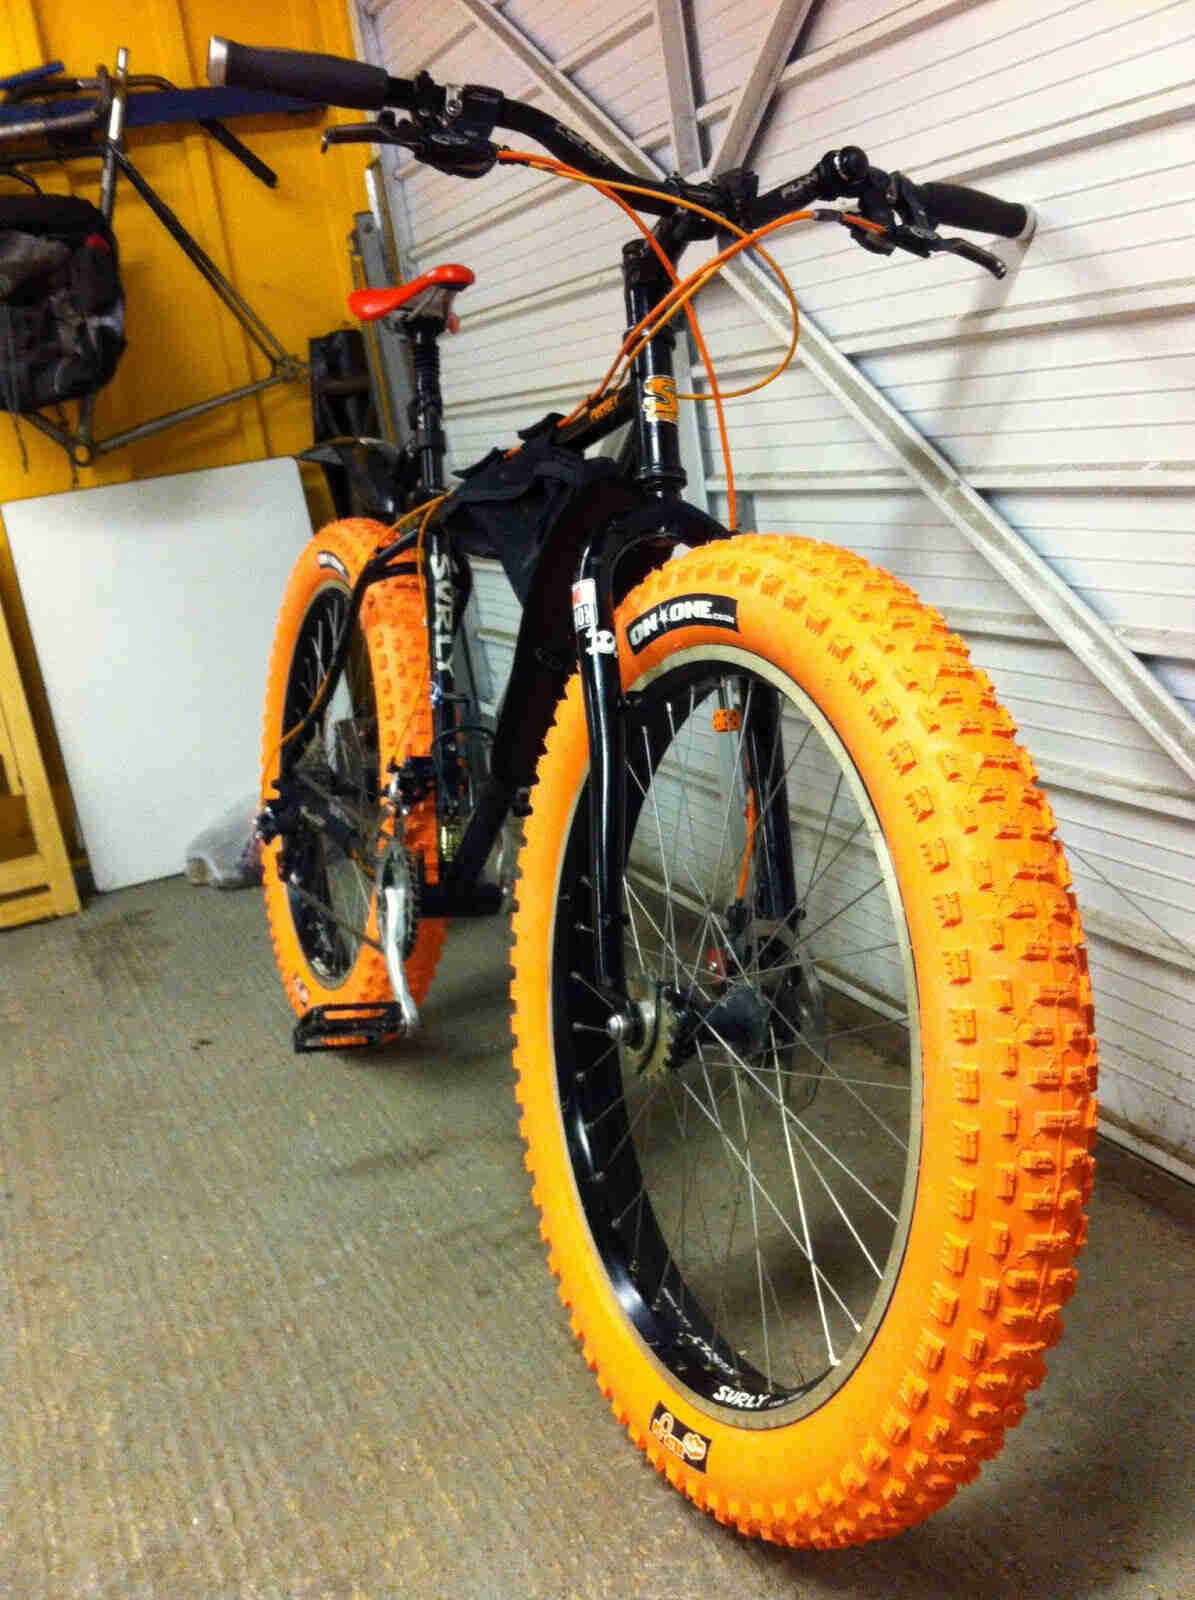 Front view of a black Surly Pugsley fat bike with orange tires and offset forks, against a garage door - on the inside